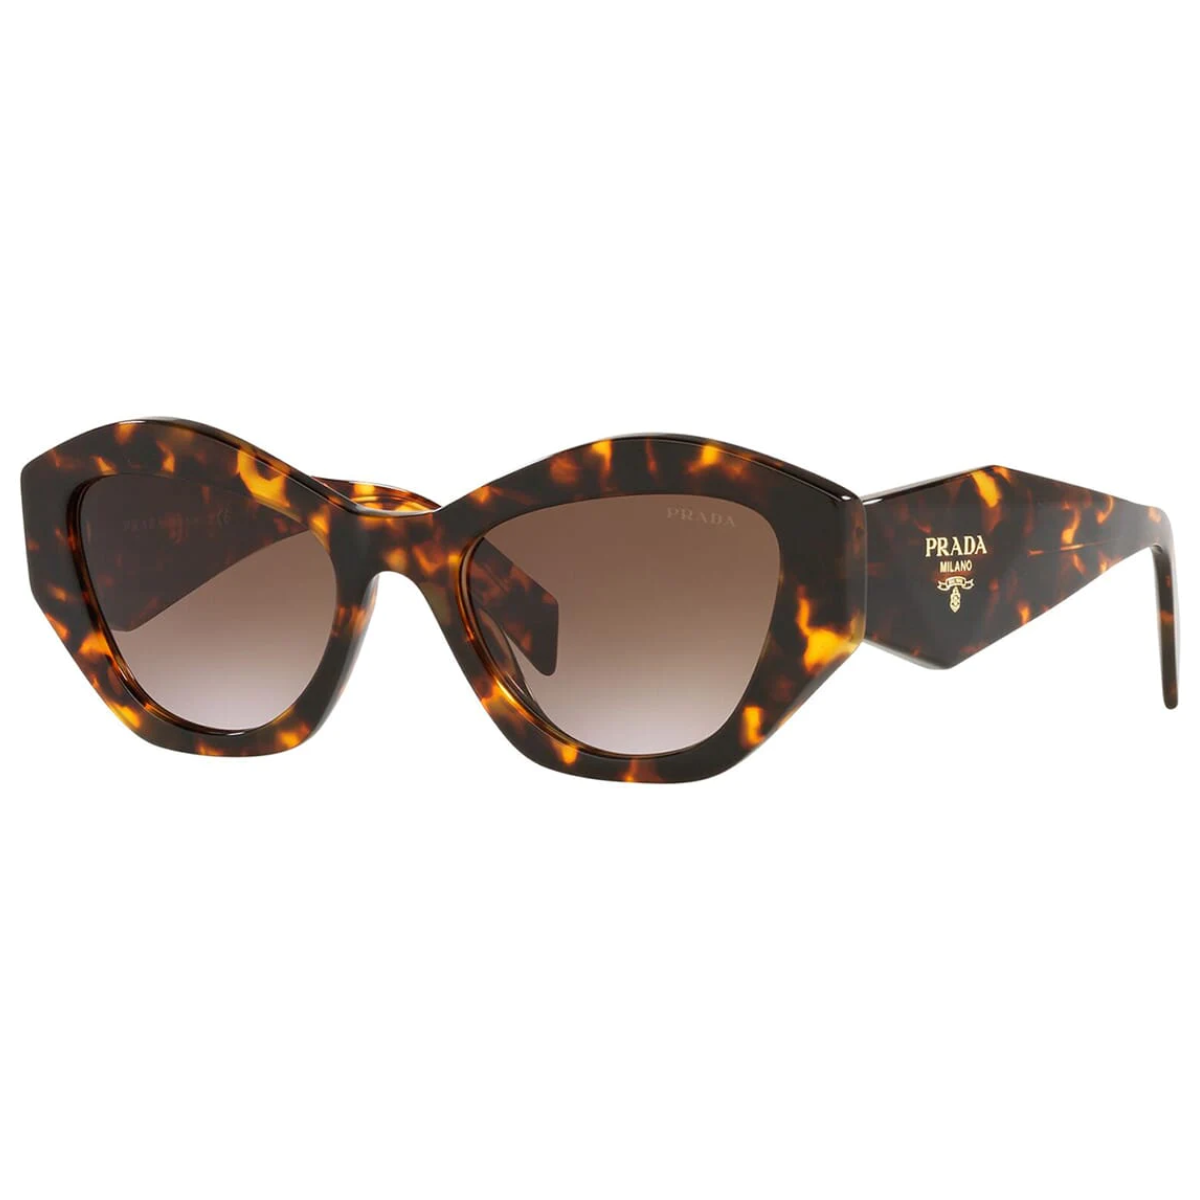 "Find your perfect pair of Prada SPR 07Y sunglasses at Optorium, combining luxury and style for men and women with cat eye design."